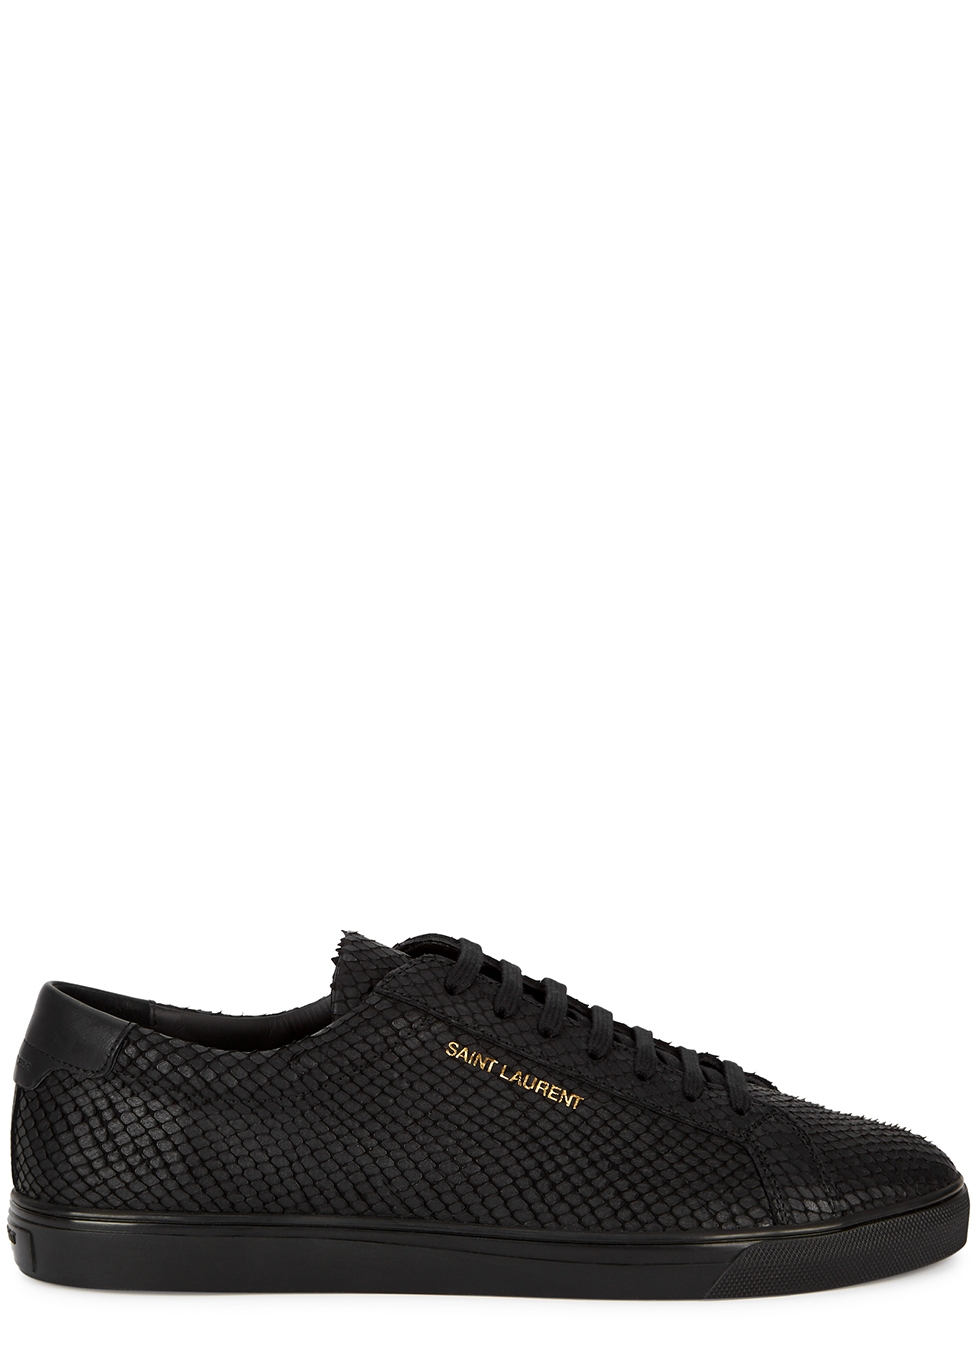 Saint Laurent Andy white python-effect leather sneakers - Harvey 